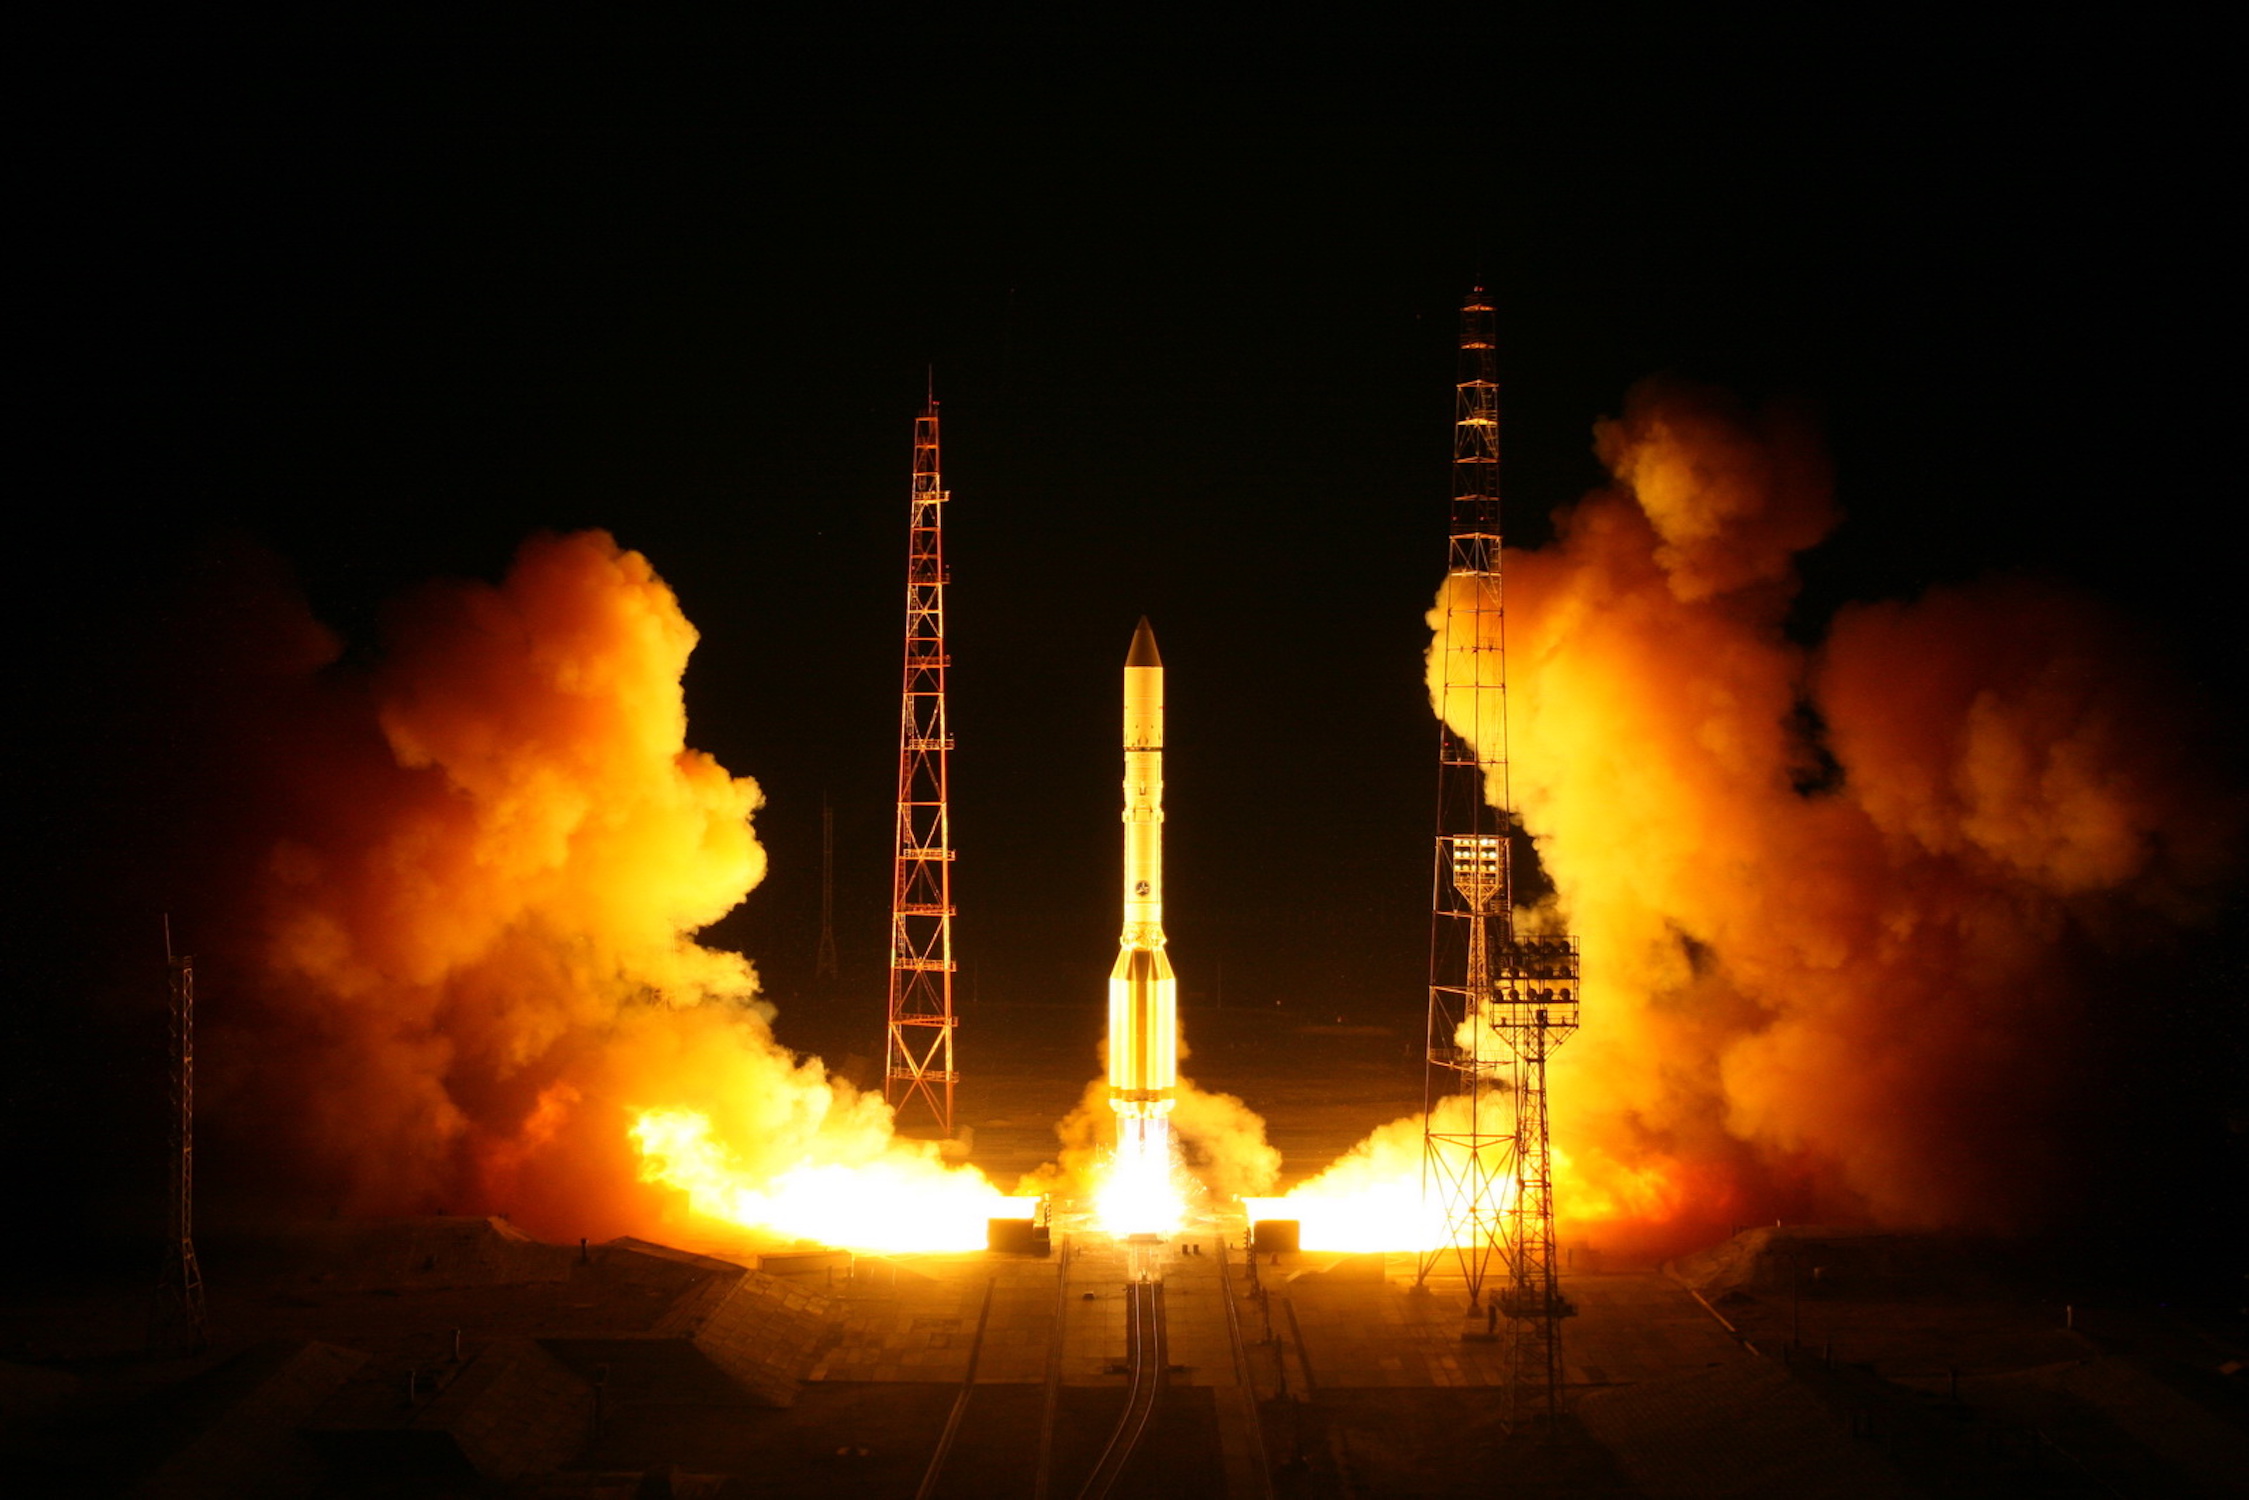 Proton-M rocket lifts off with the Blagovest 11L satellite